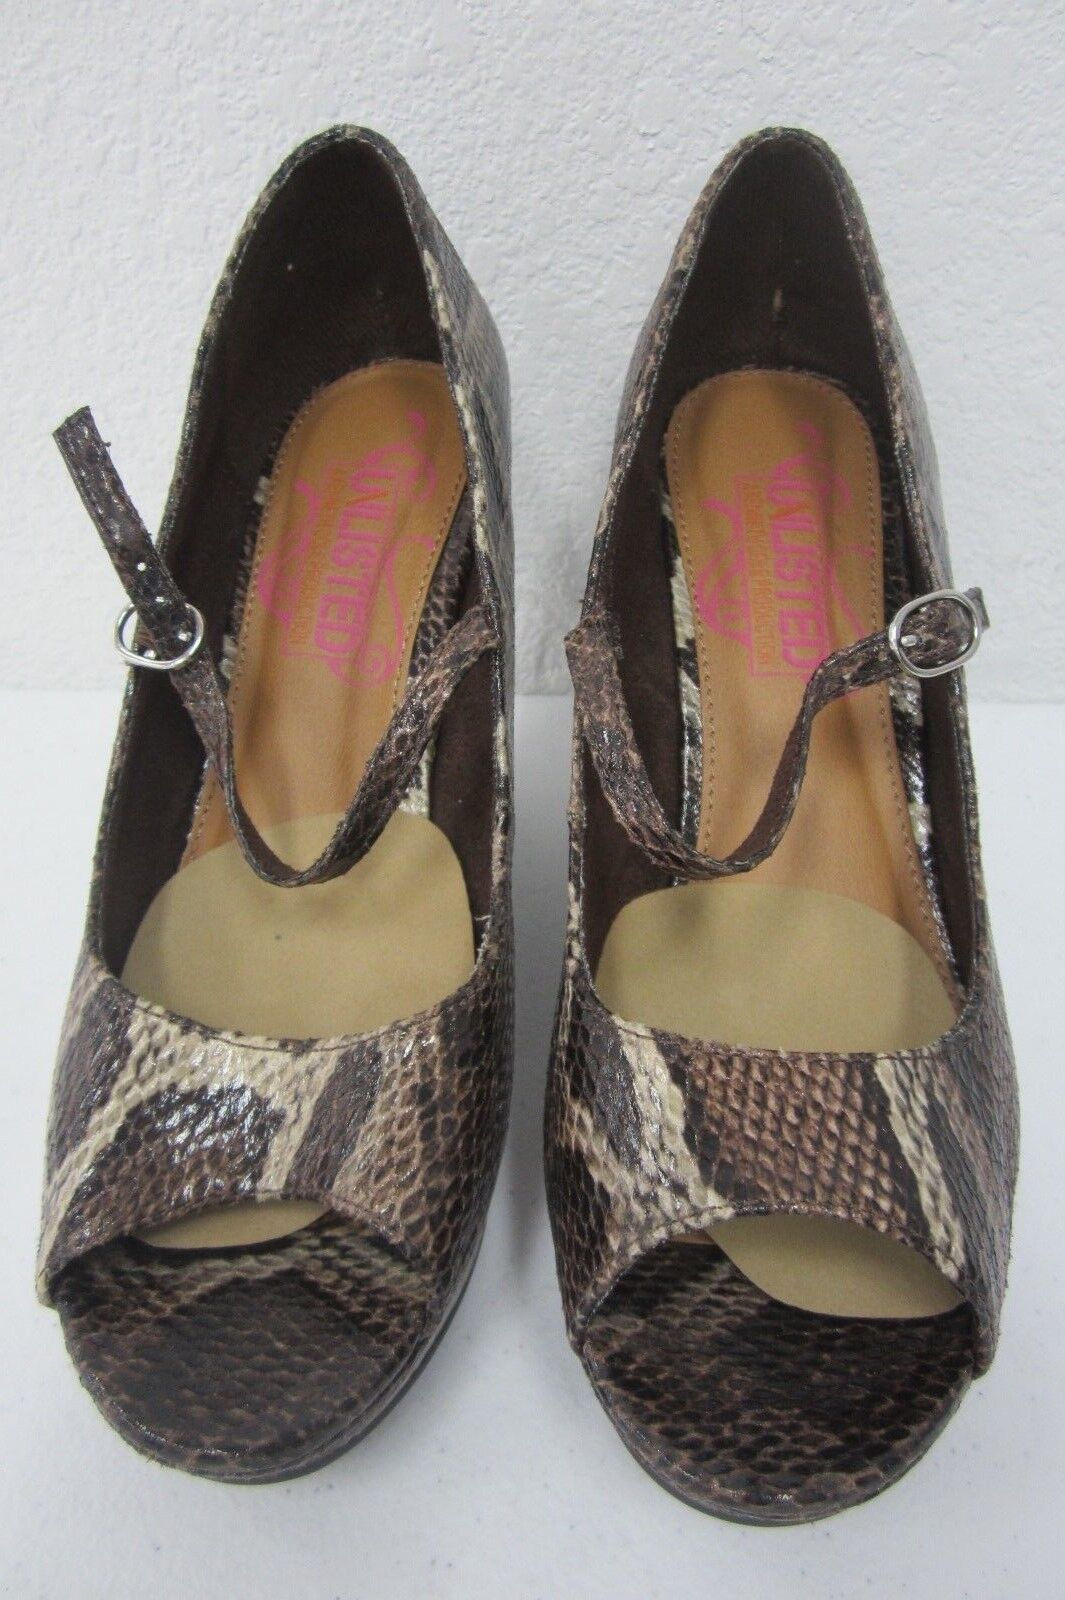 *NIB* UNLISTED A KENNETH COLE PRODUCTION BUZZY BROWN SNAKE  HEEL WEDGE Sz  8.5 M